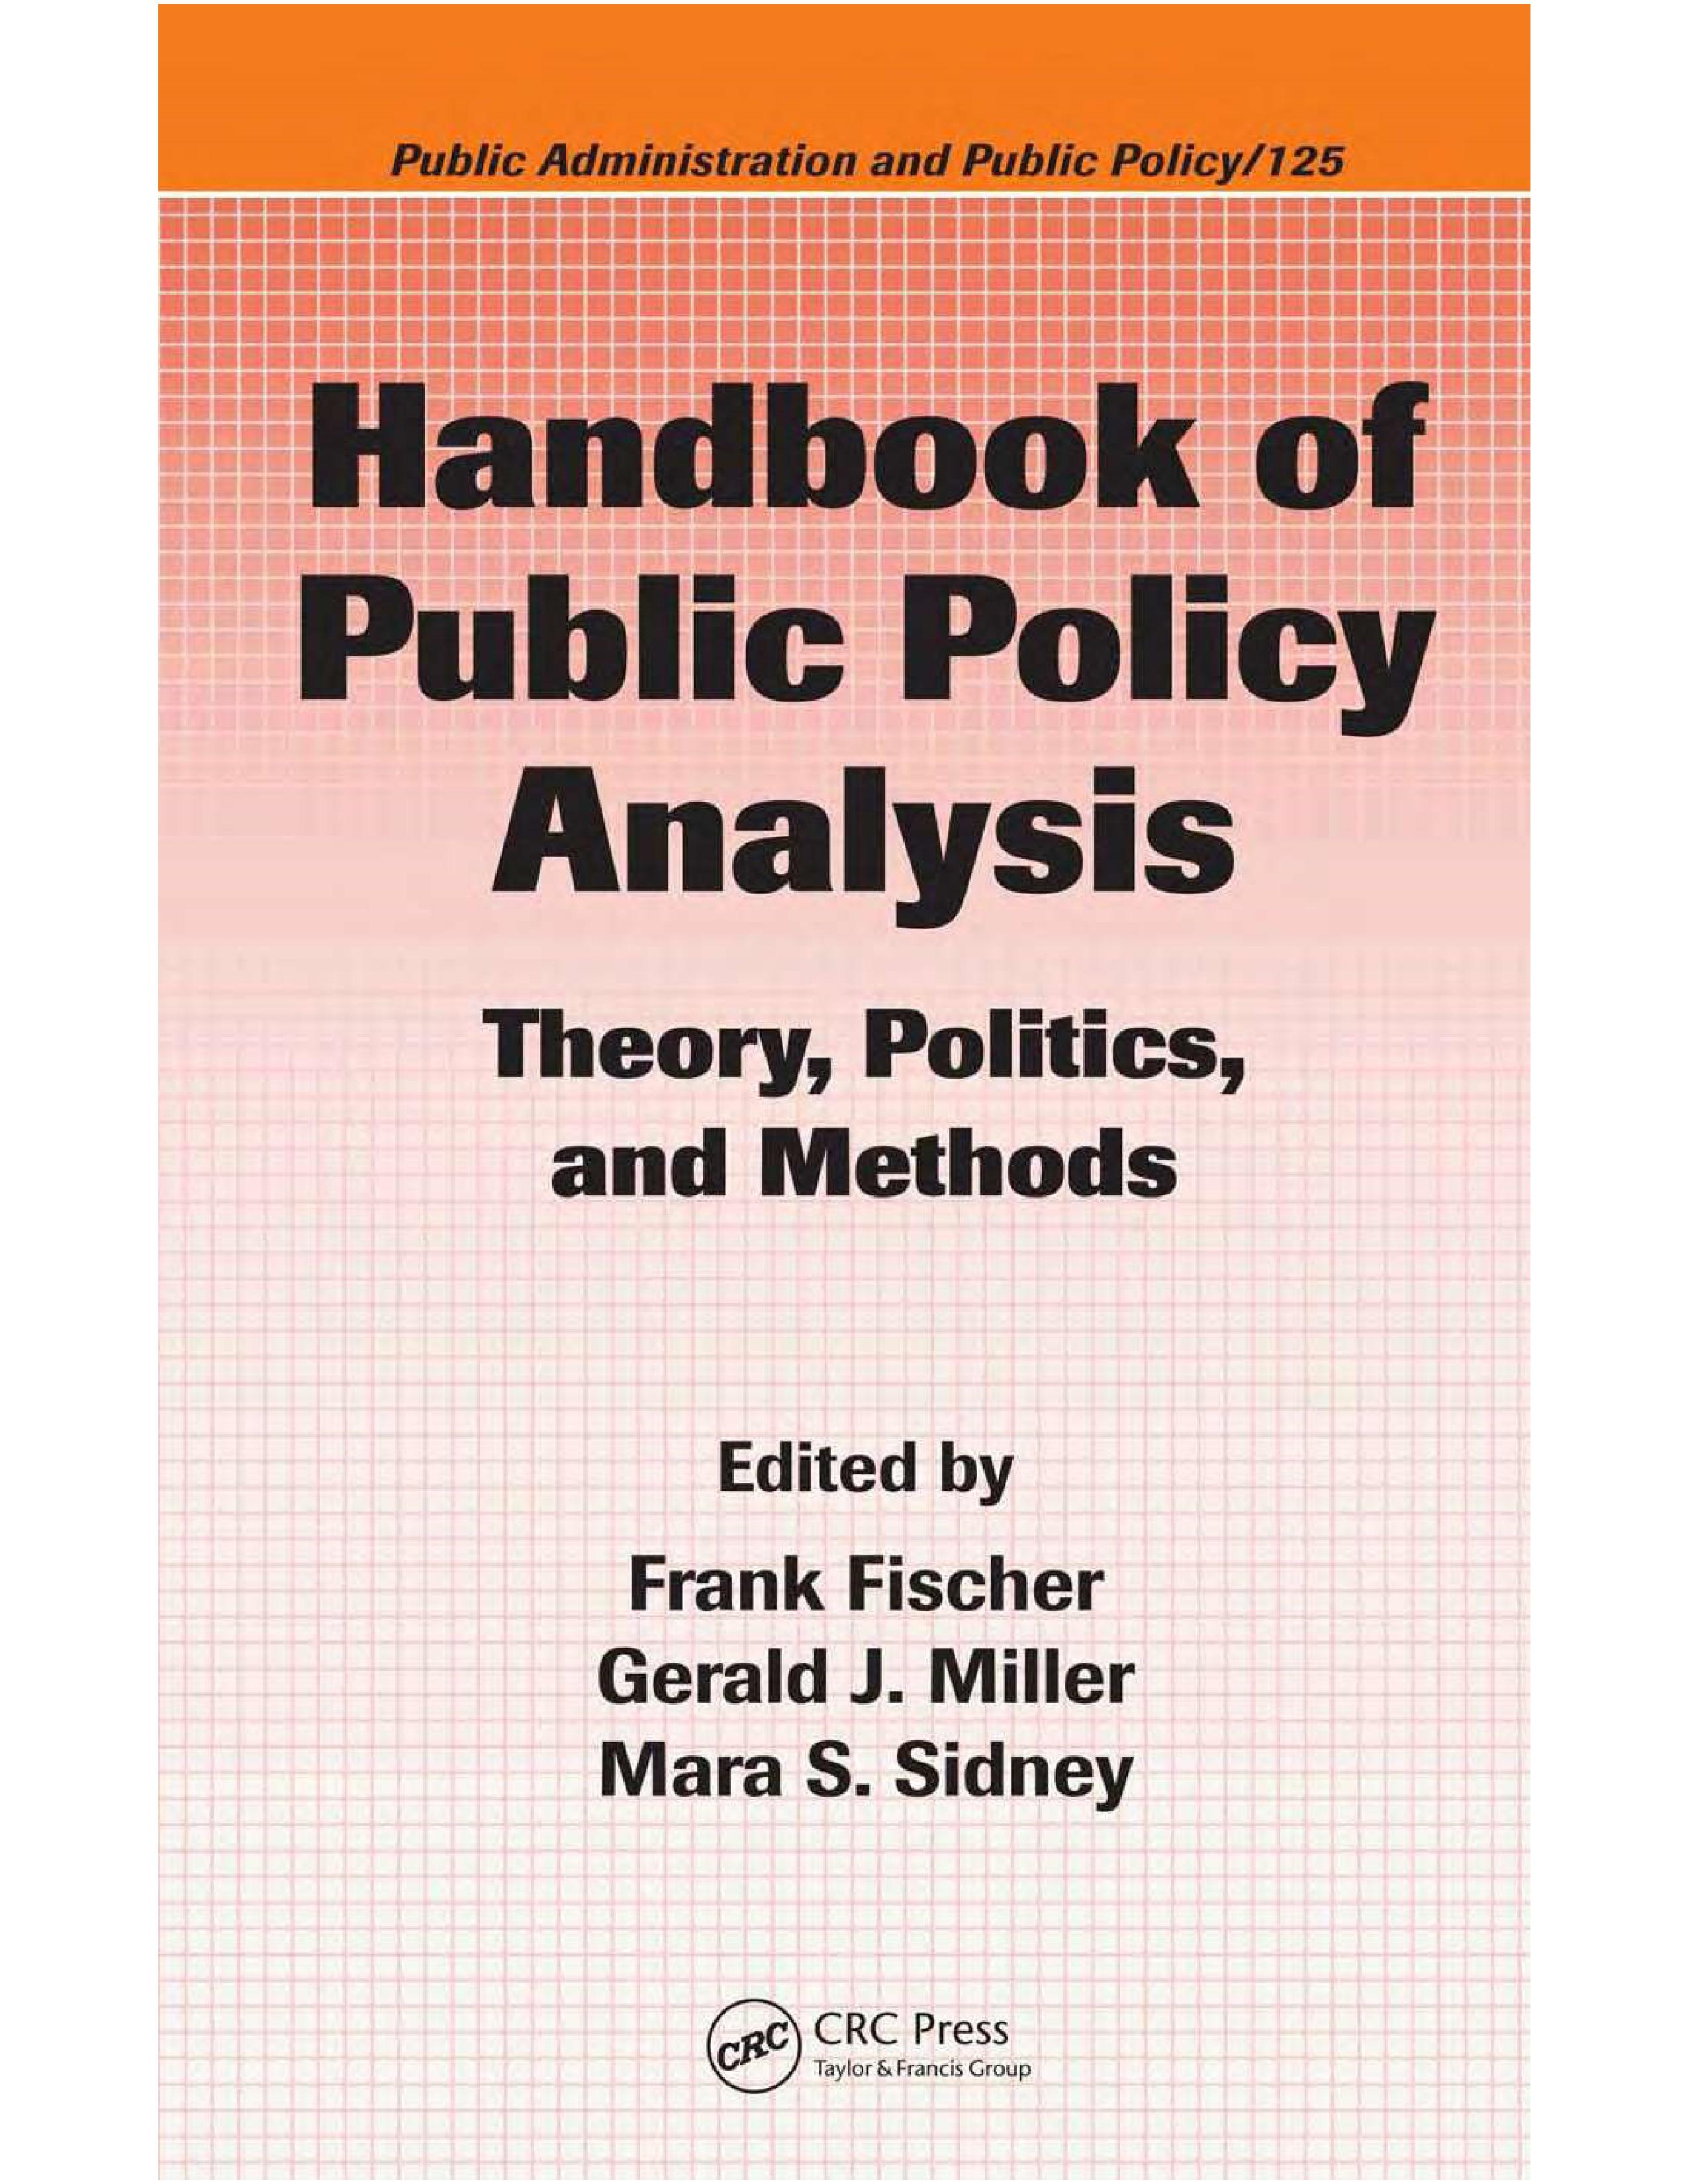 Handbook of public policy analysis : Theory, politics, and methods